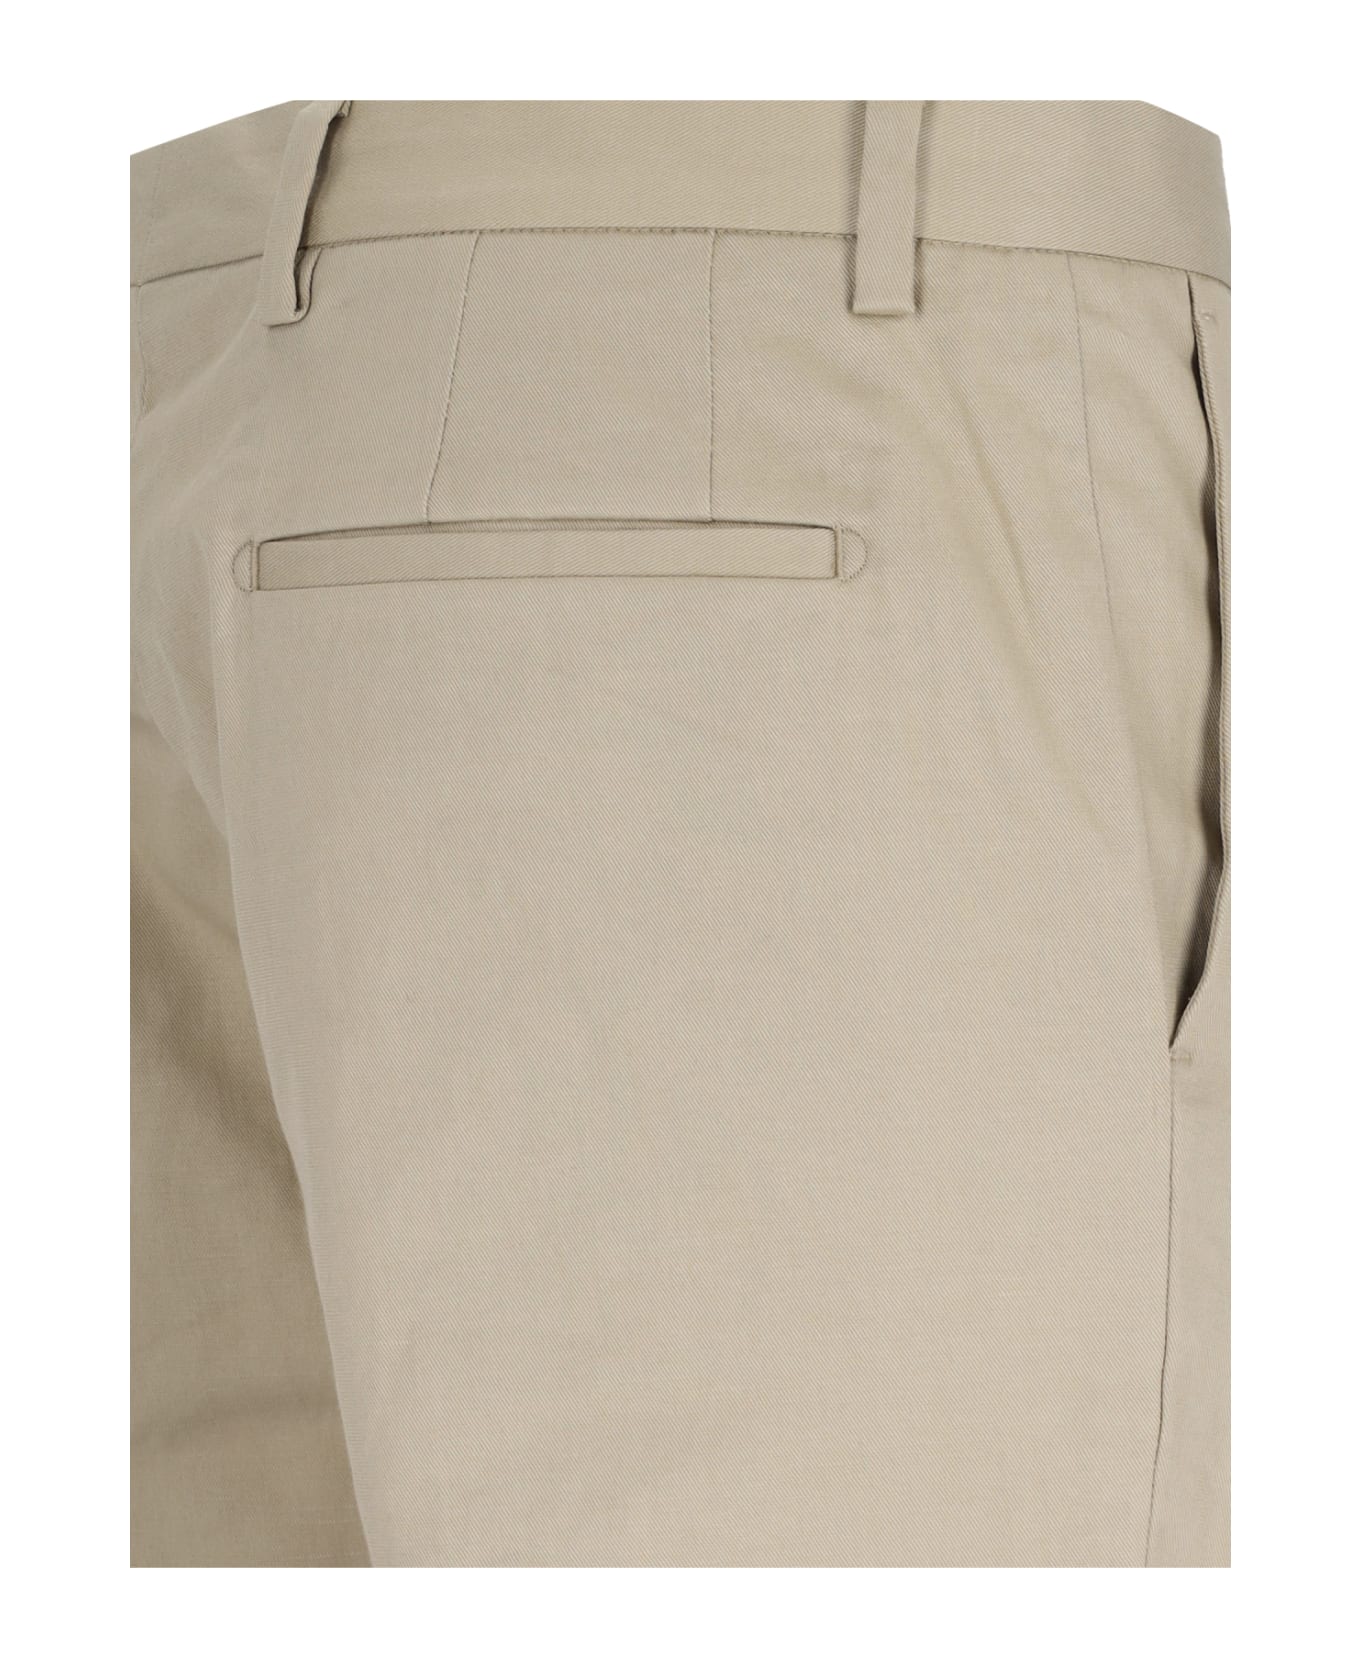 Paul Smith Chinos - Beige ボトムス